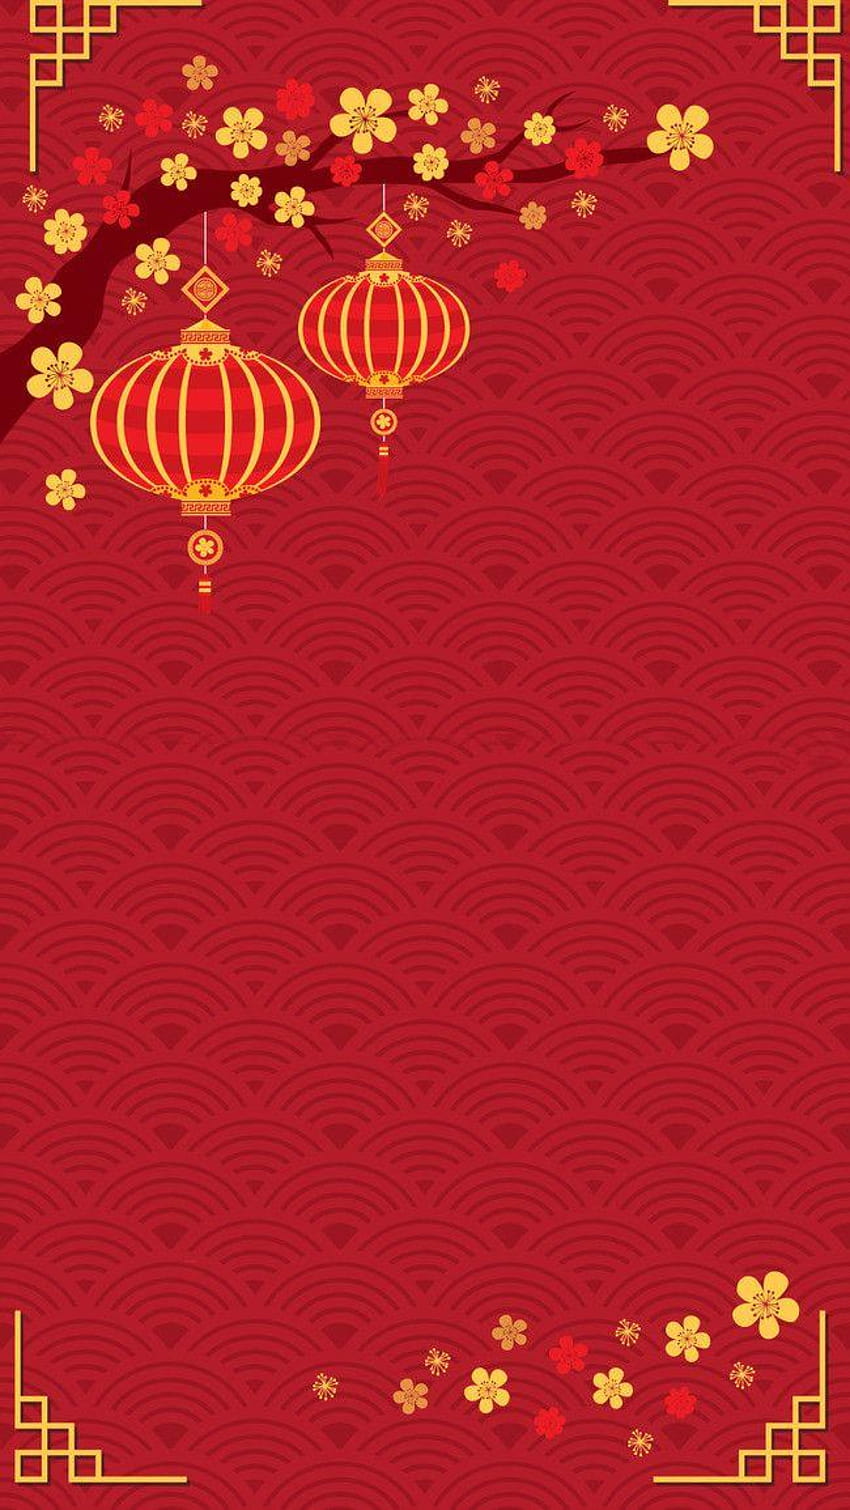 Chinese New Year Festive Backgrounds Psd Layered in 2019 ..., cny 2020 phone HD phone wallpaper